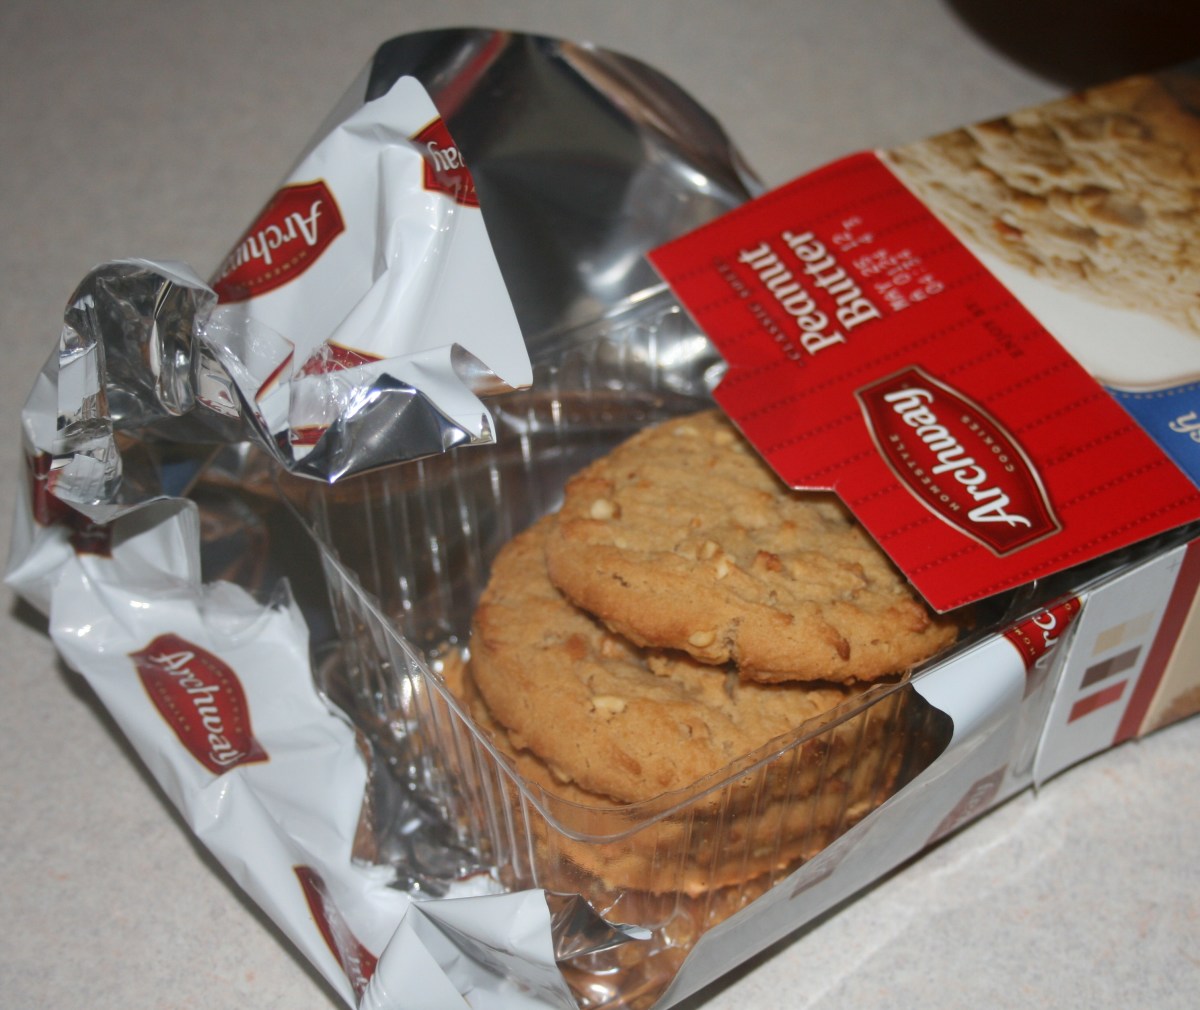 A box, a plastic carton and a wrapper? That's a lot of packaging for a dozen cookies!